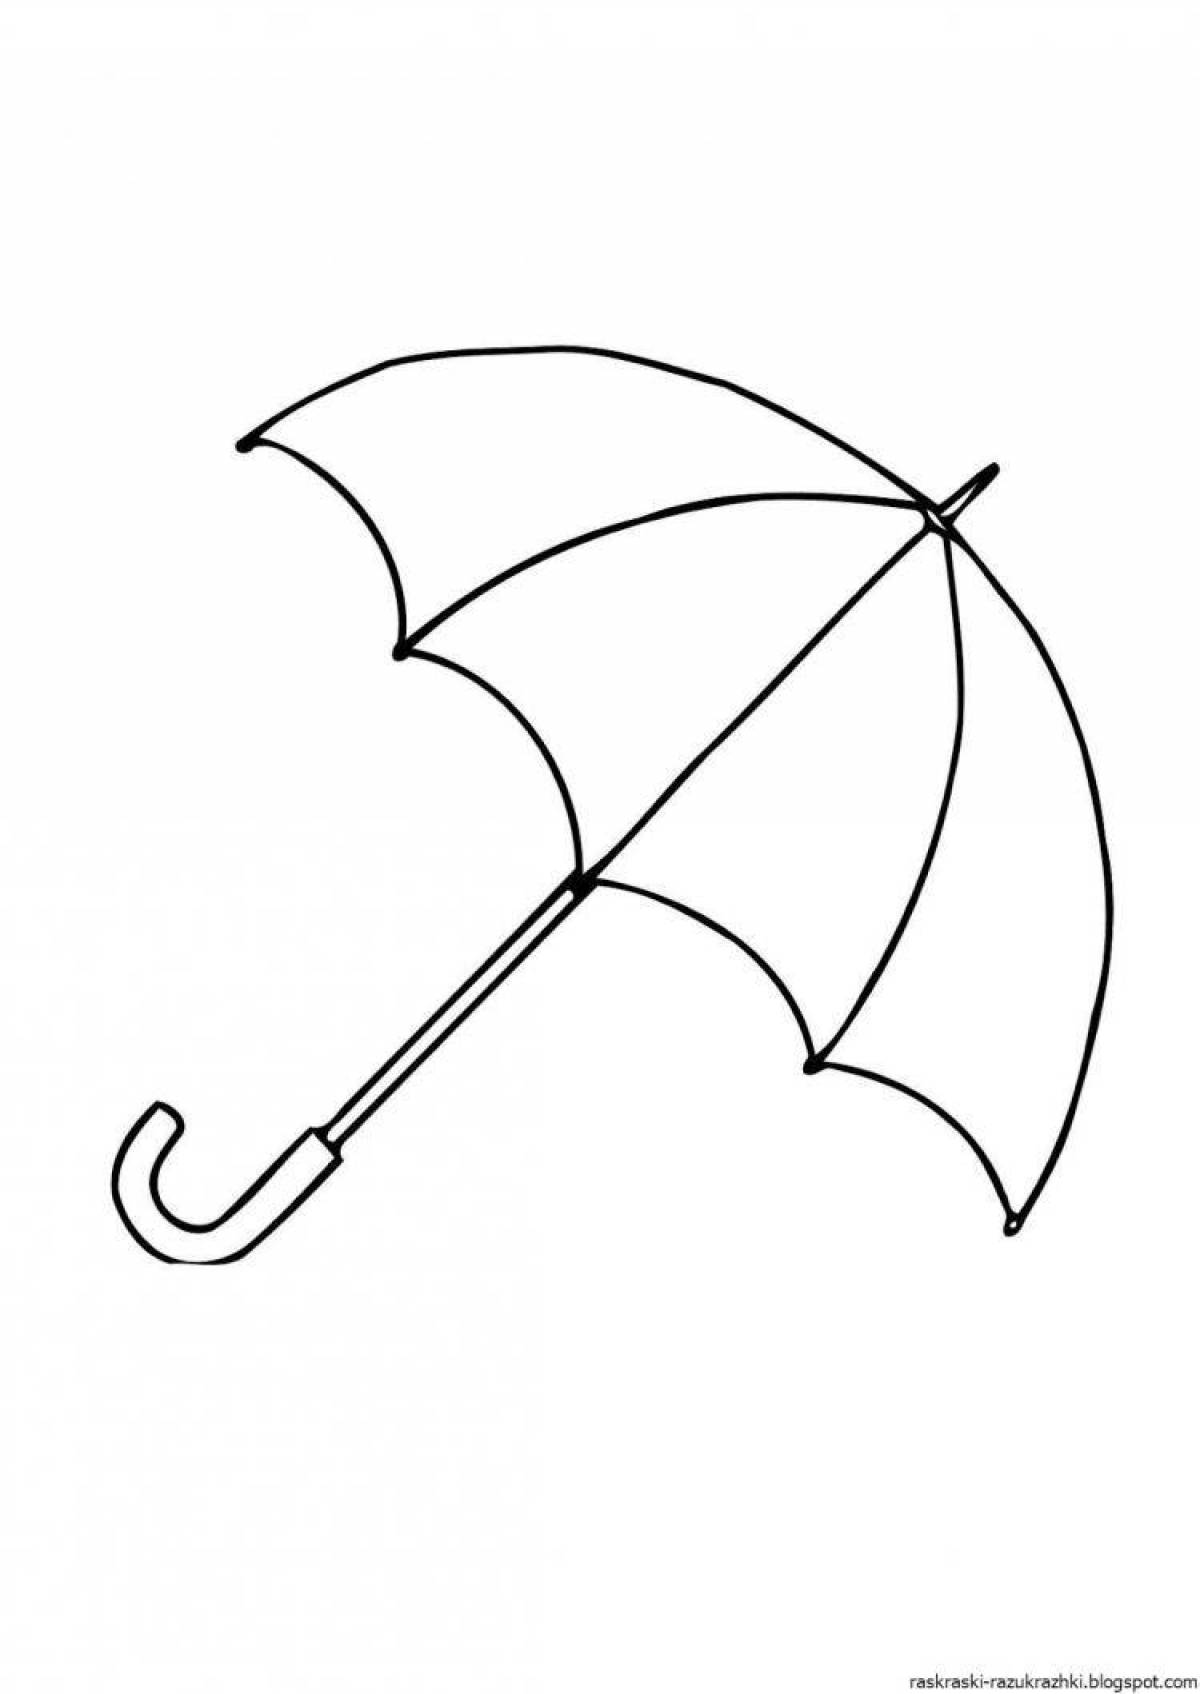 Colorful and bright umbrella coloring book for kids